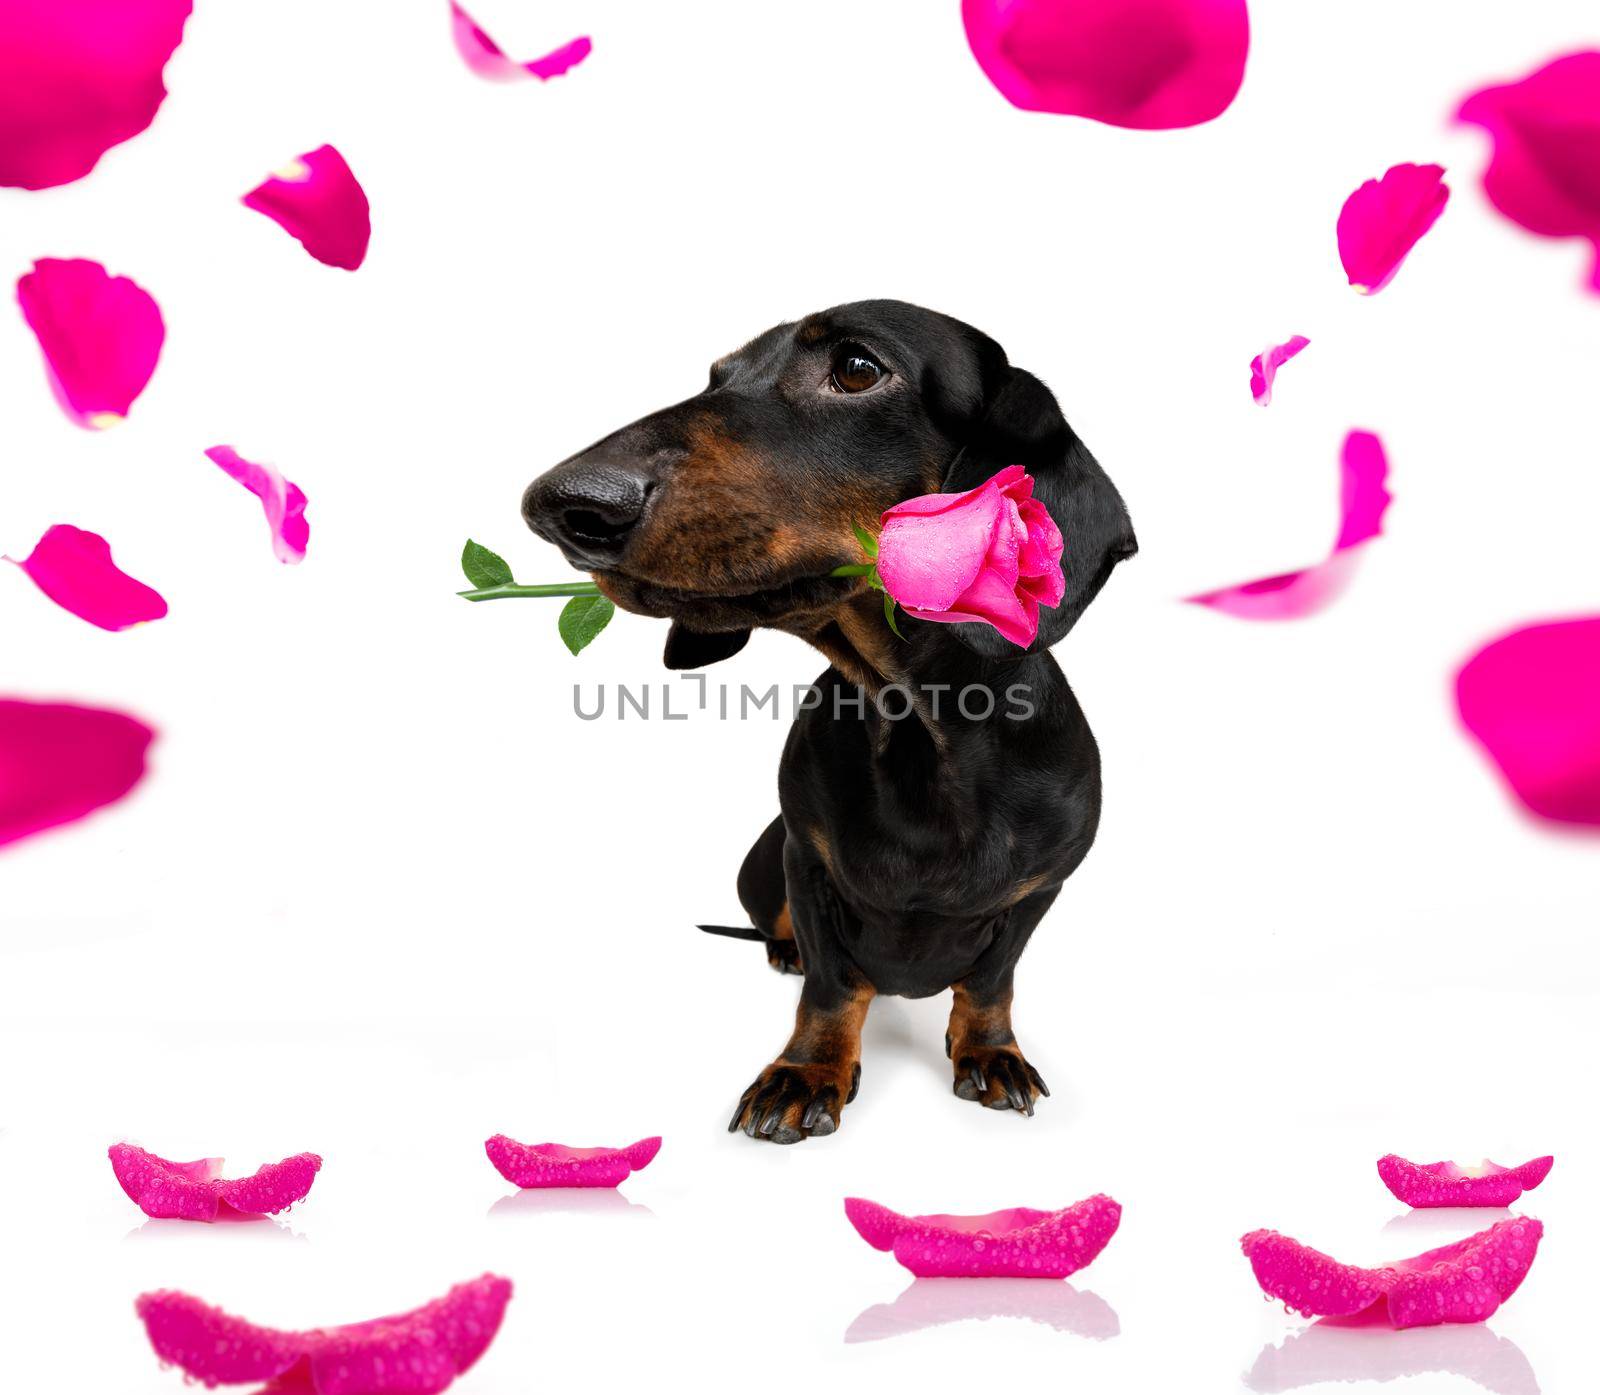 dachshund dog looking and staring at you   ,with a valentines roses isolated on white background,